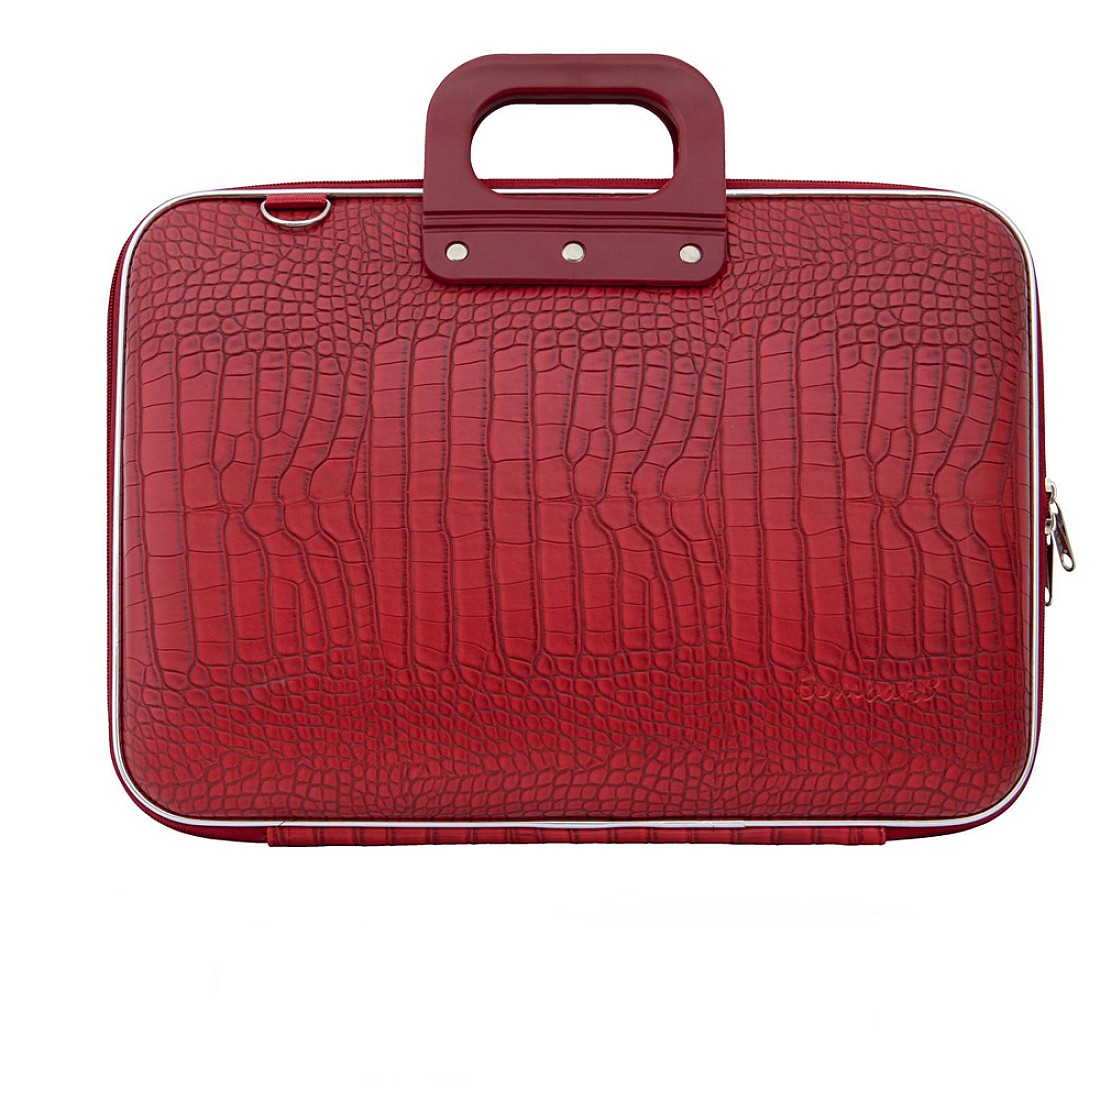 Bombata Classic Cocco (15.6'') Red Laptop Briefcase